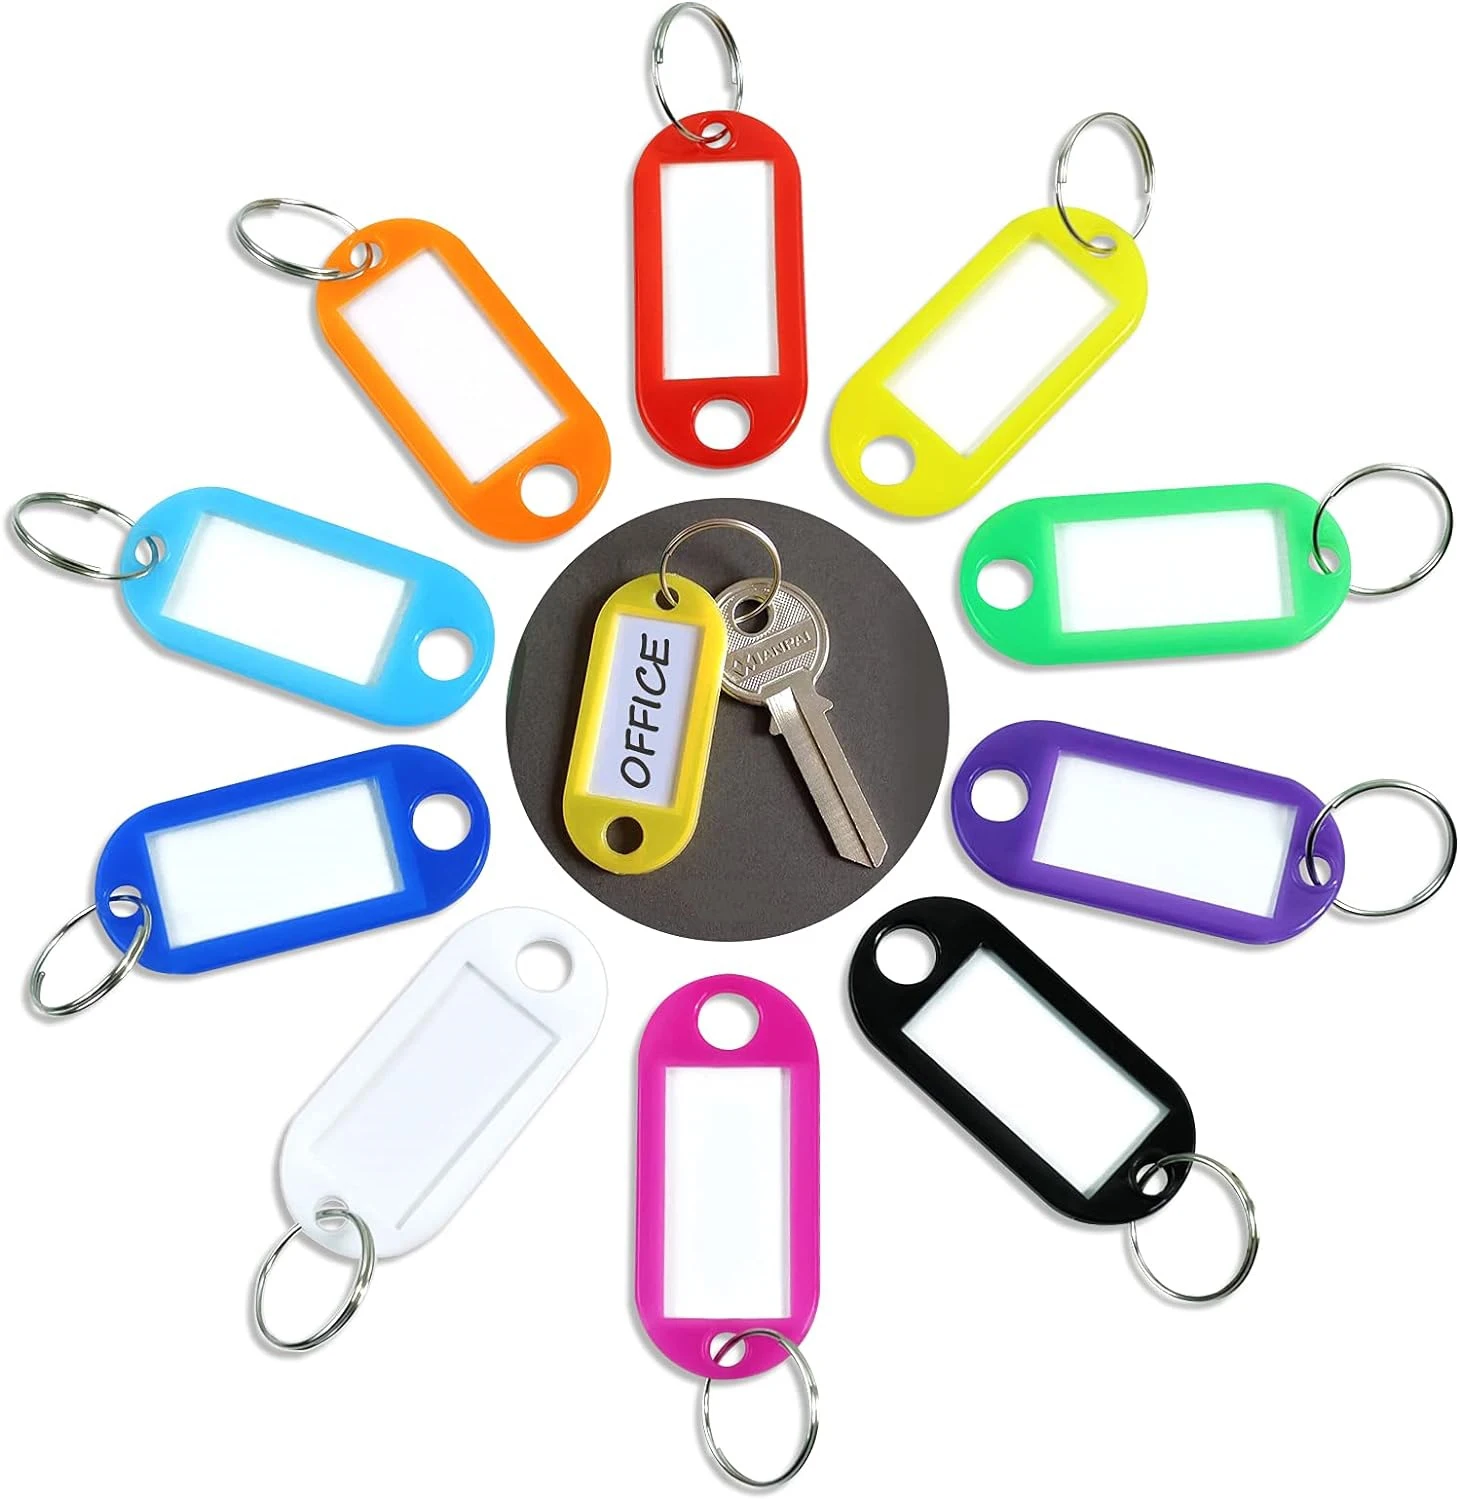 10Pcs/lot Tough Plastic Key Tags Keychains with Split Ring Label Window for  DIY Key Chain Kit Numbered Name Baggage Luggage Tags - AliExpress